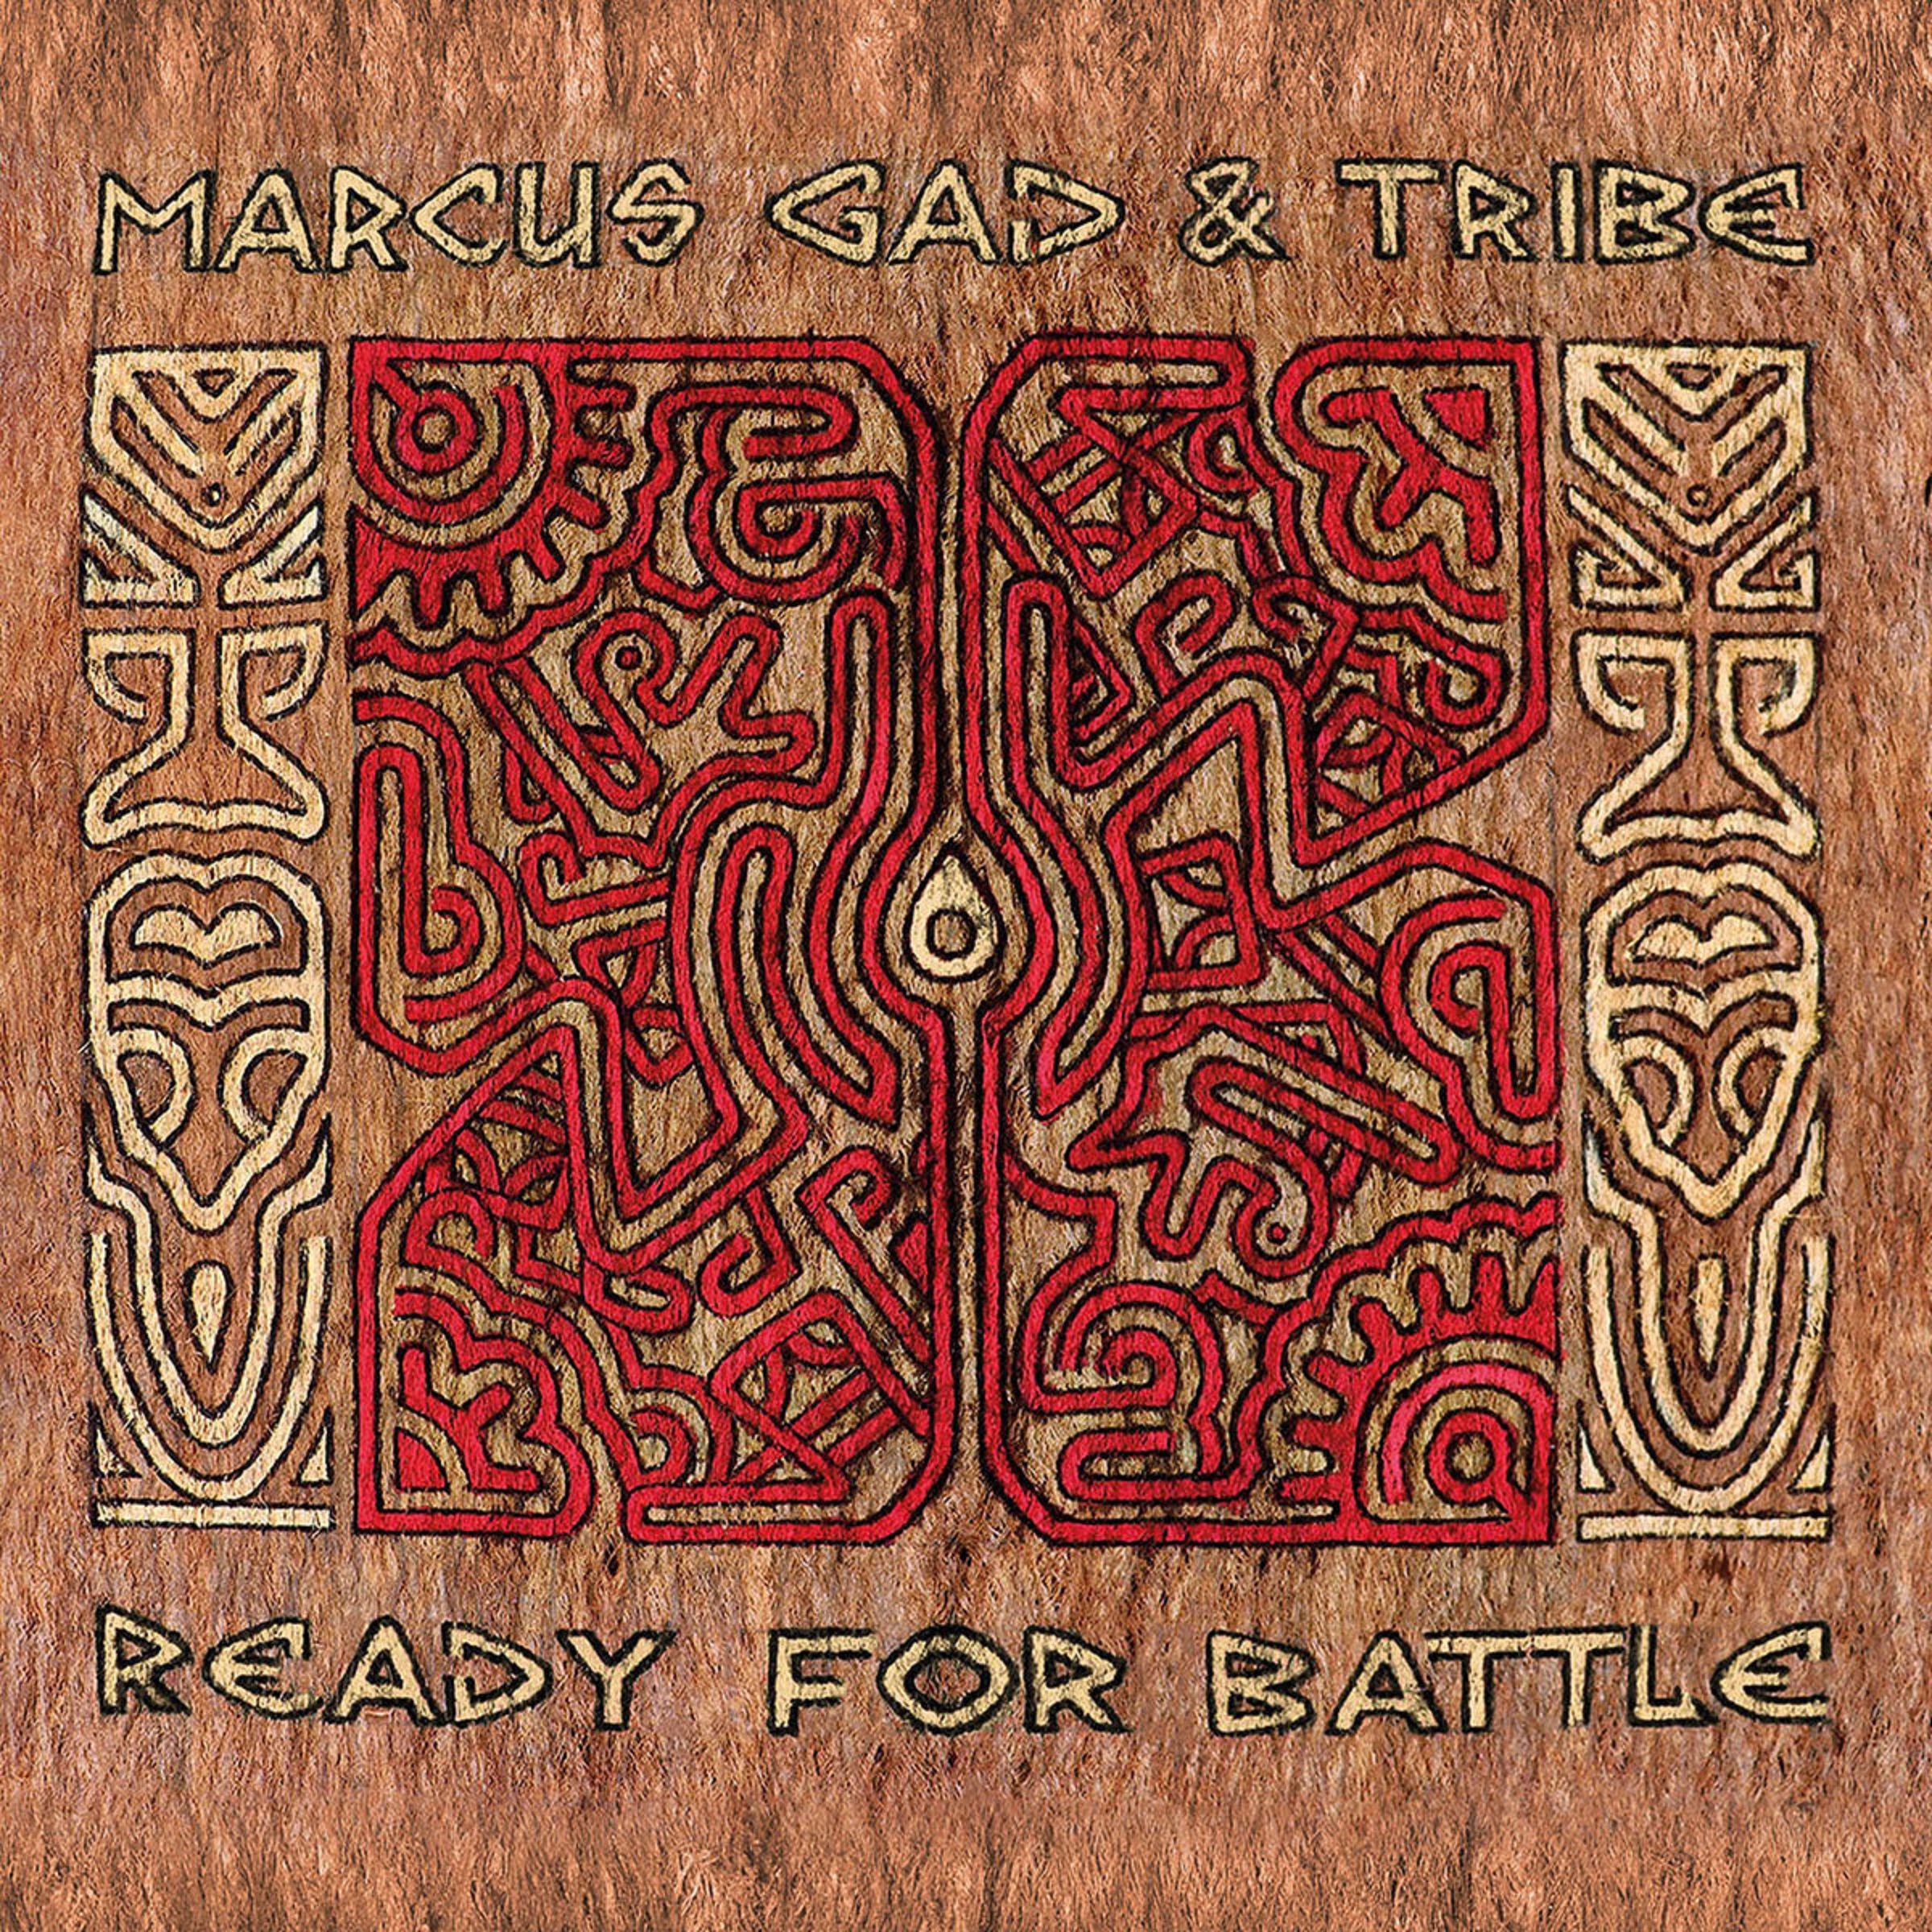 Marcus Gad & Tribe Release New Album "Ready For Battle"